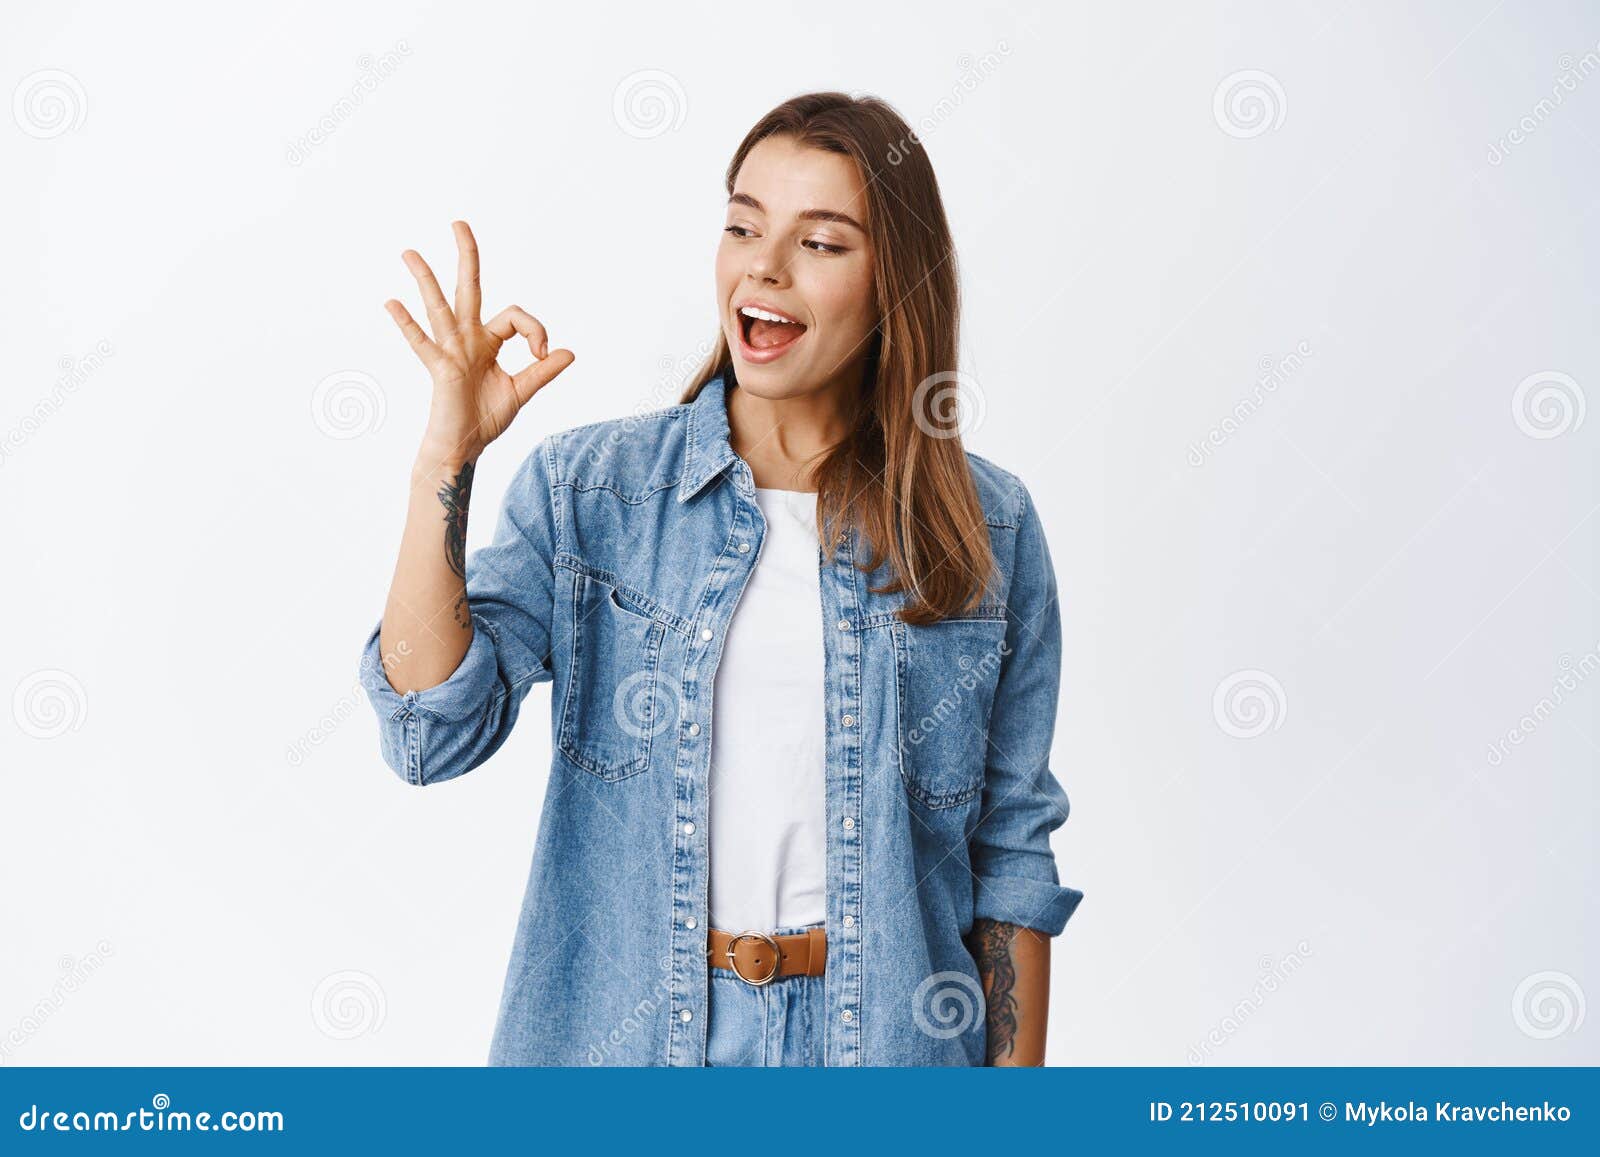 alright. smiling cute girl showing okay sign and say yes, approve something good, like and agree, standing pleased